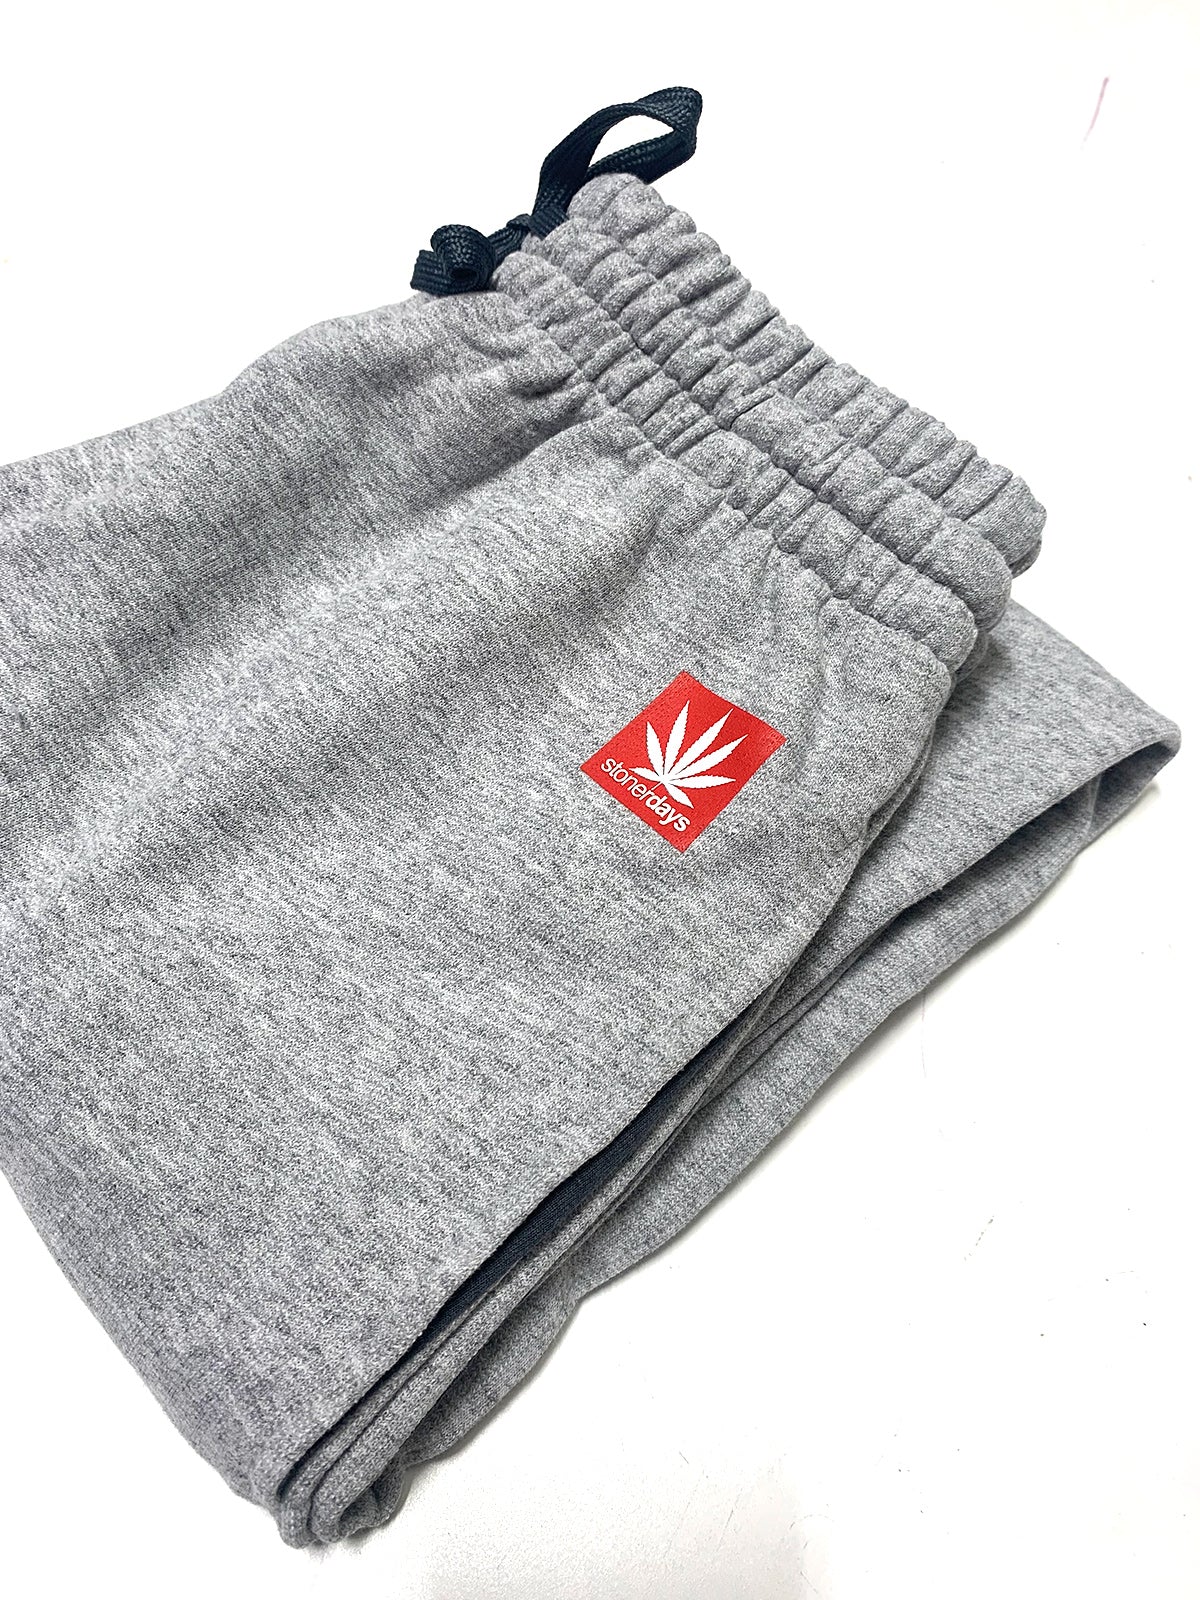 StonerDays Mls All-stars Four20 Grey Jogger with logo, comfortable fit, front view